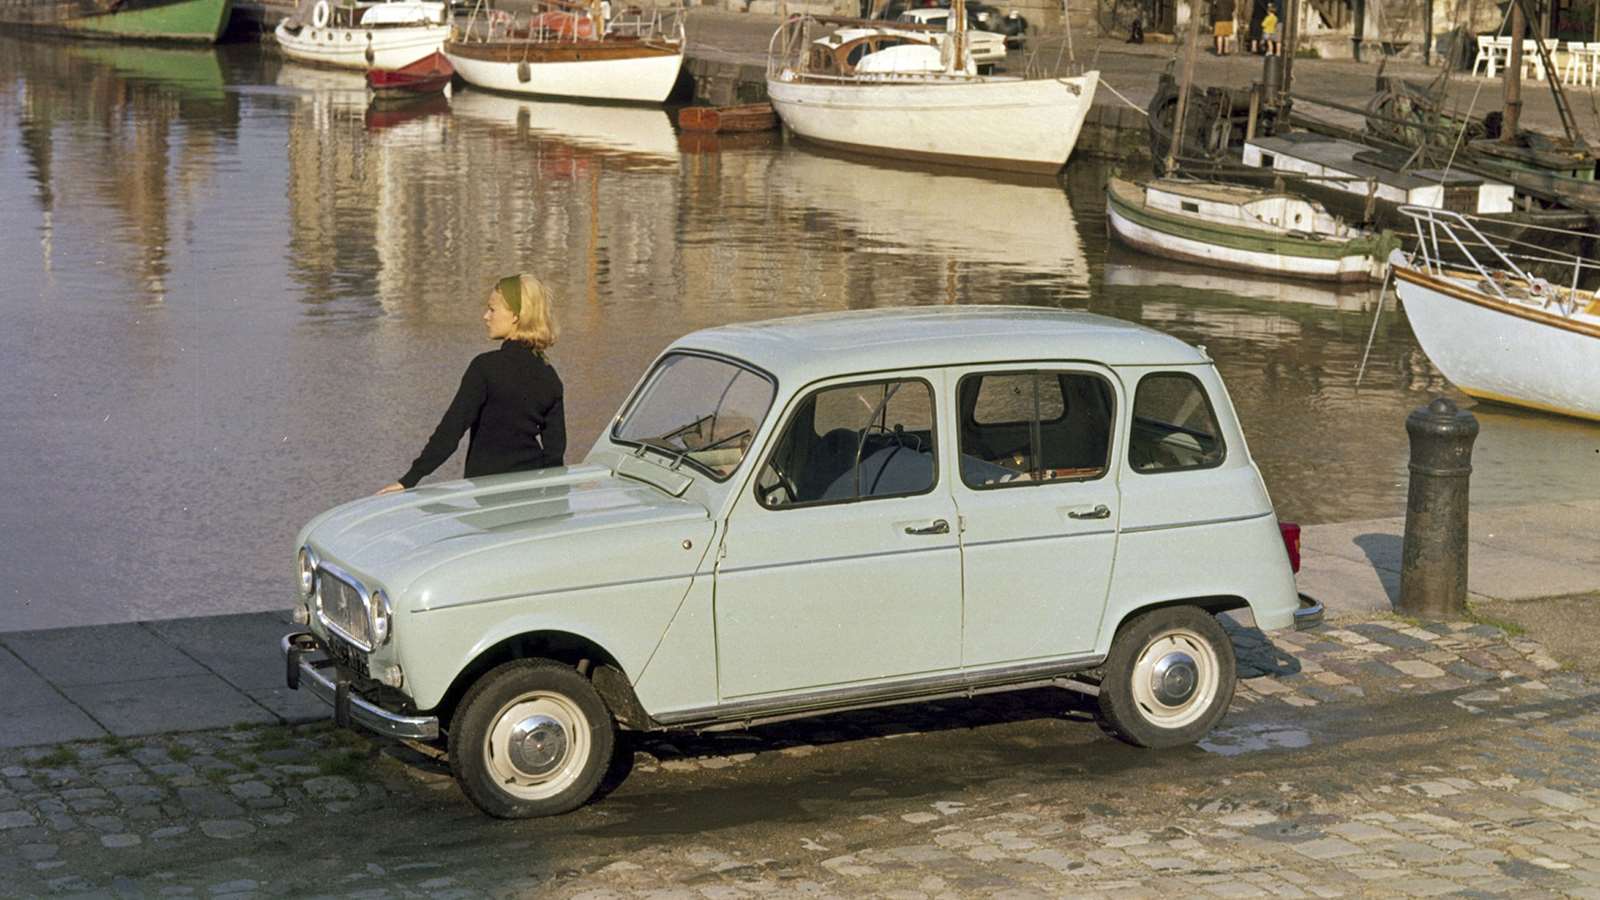 Is the Renault 4 worth a revisit?, Axon's Automotive Anorak